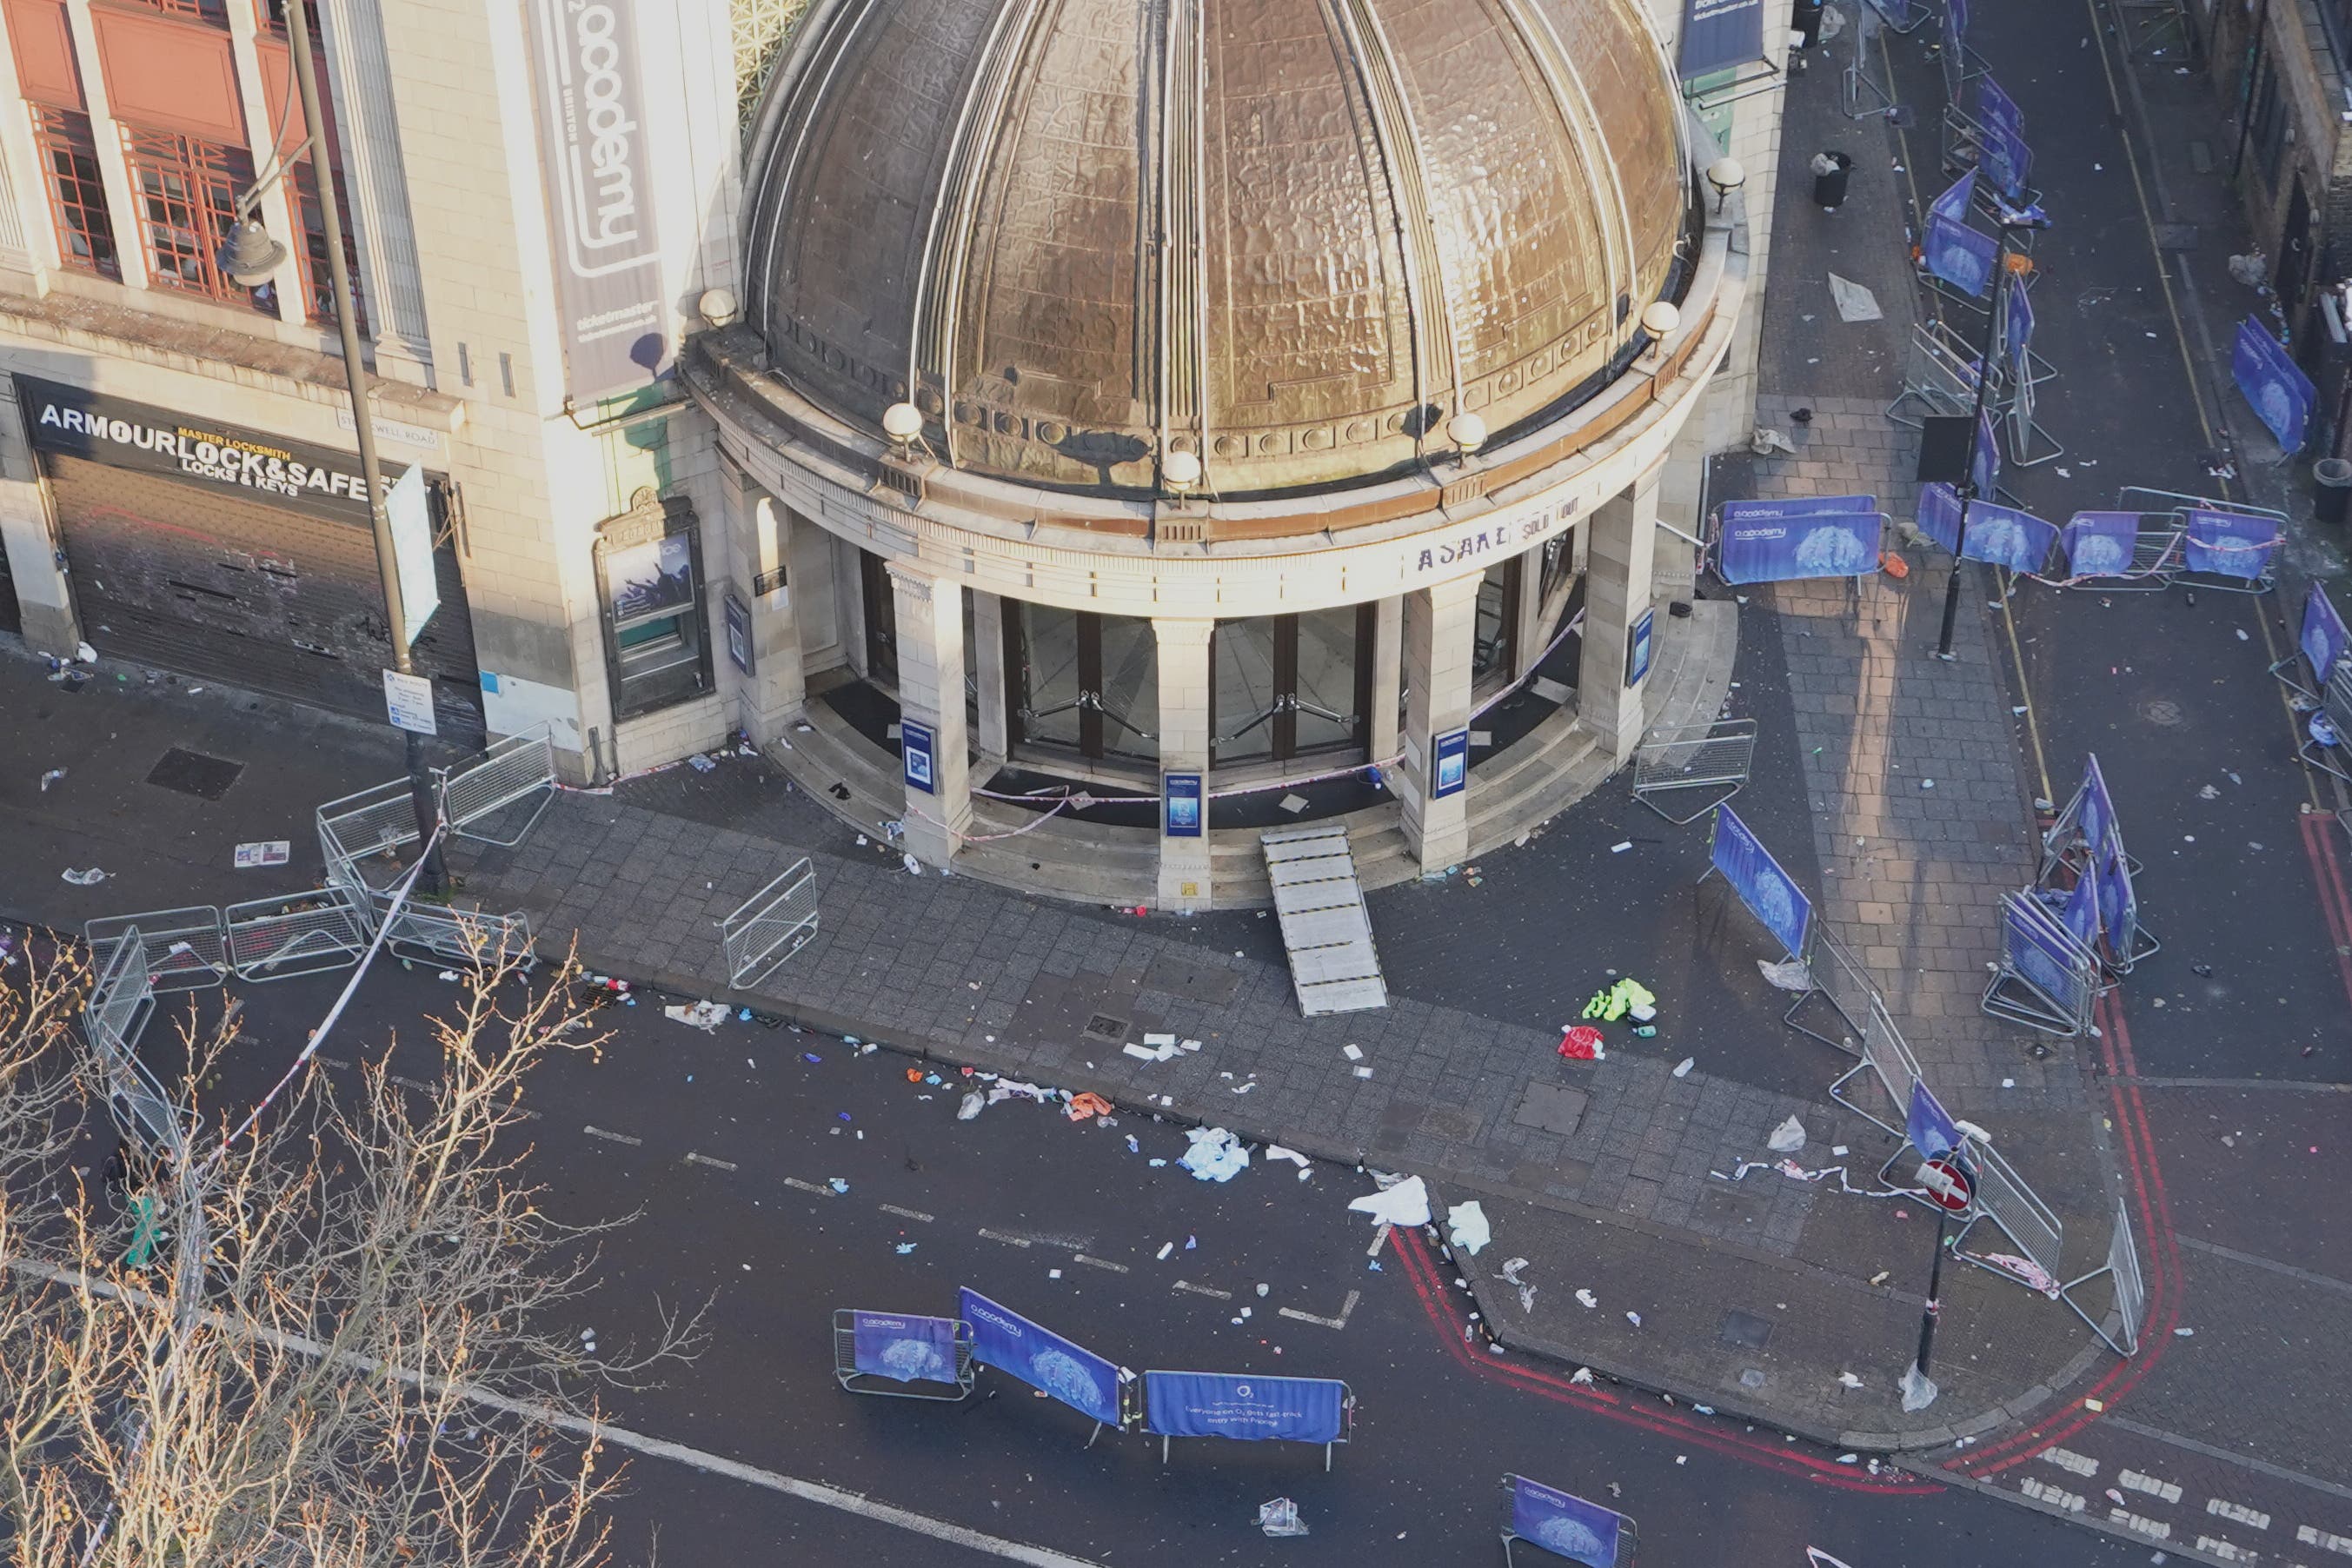 Nigerian artist Asake said he is ‘devastated’ and ‘overwhelmed with grief’ after a woman died following a crowd crush outside his concert at the O2 Academy Brixton